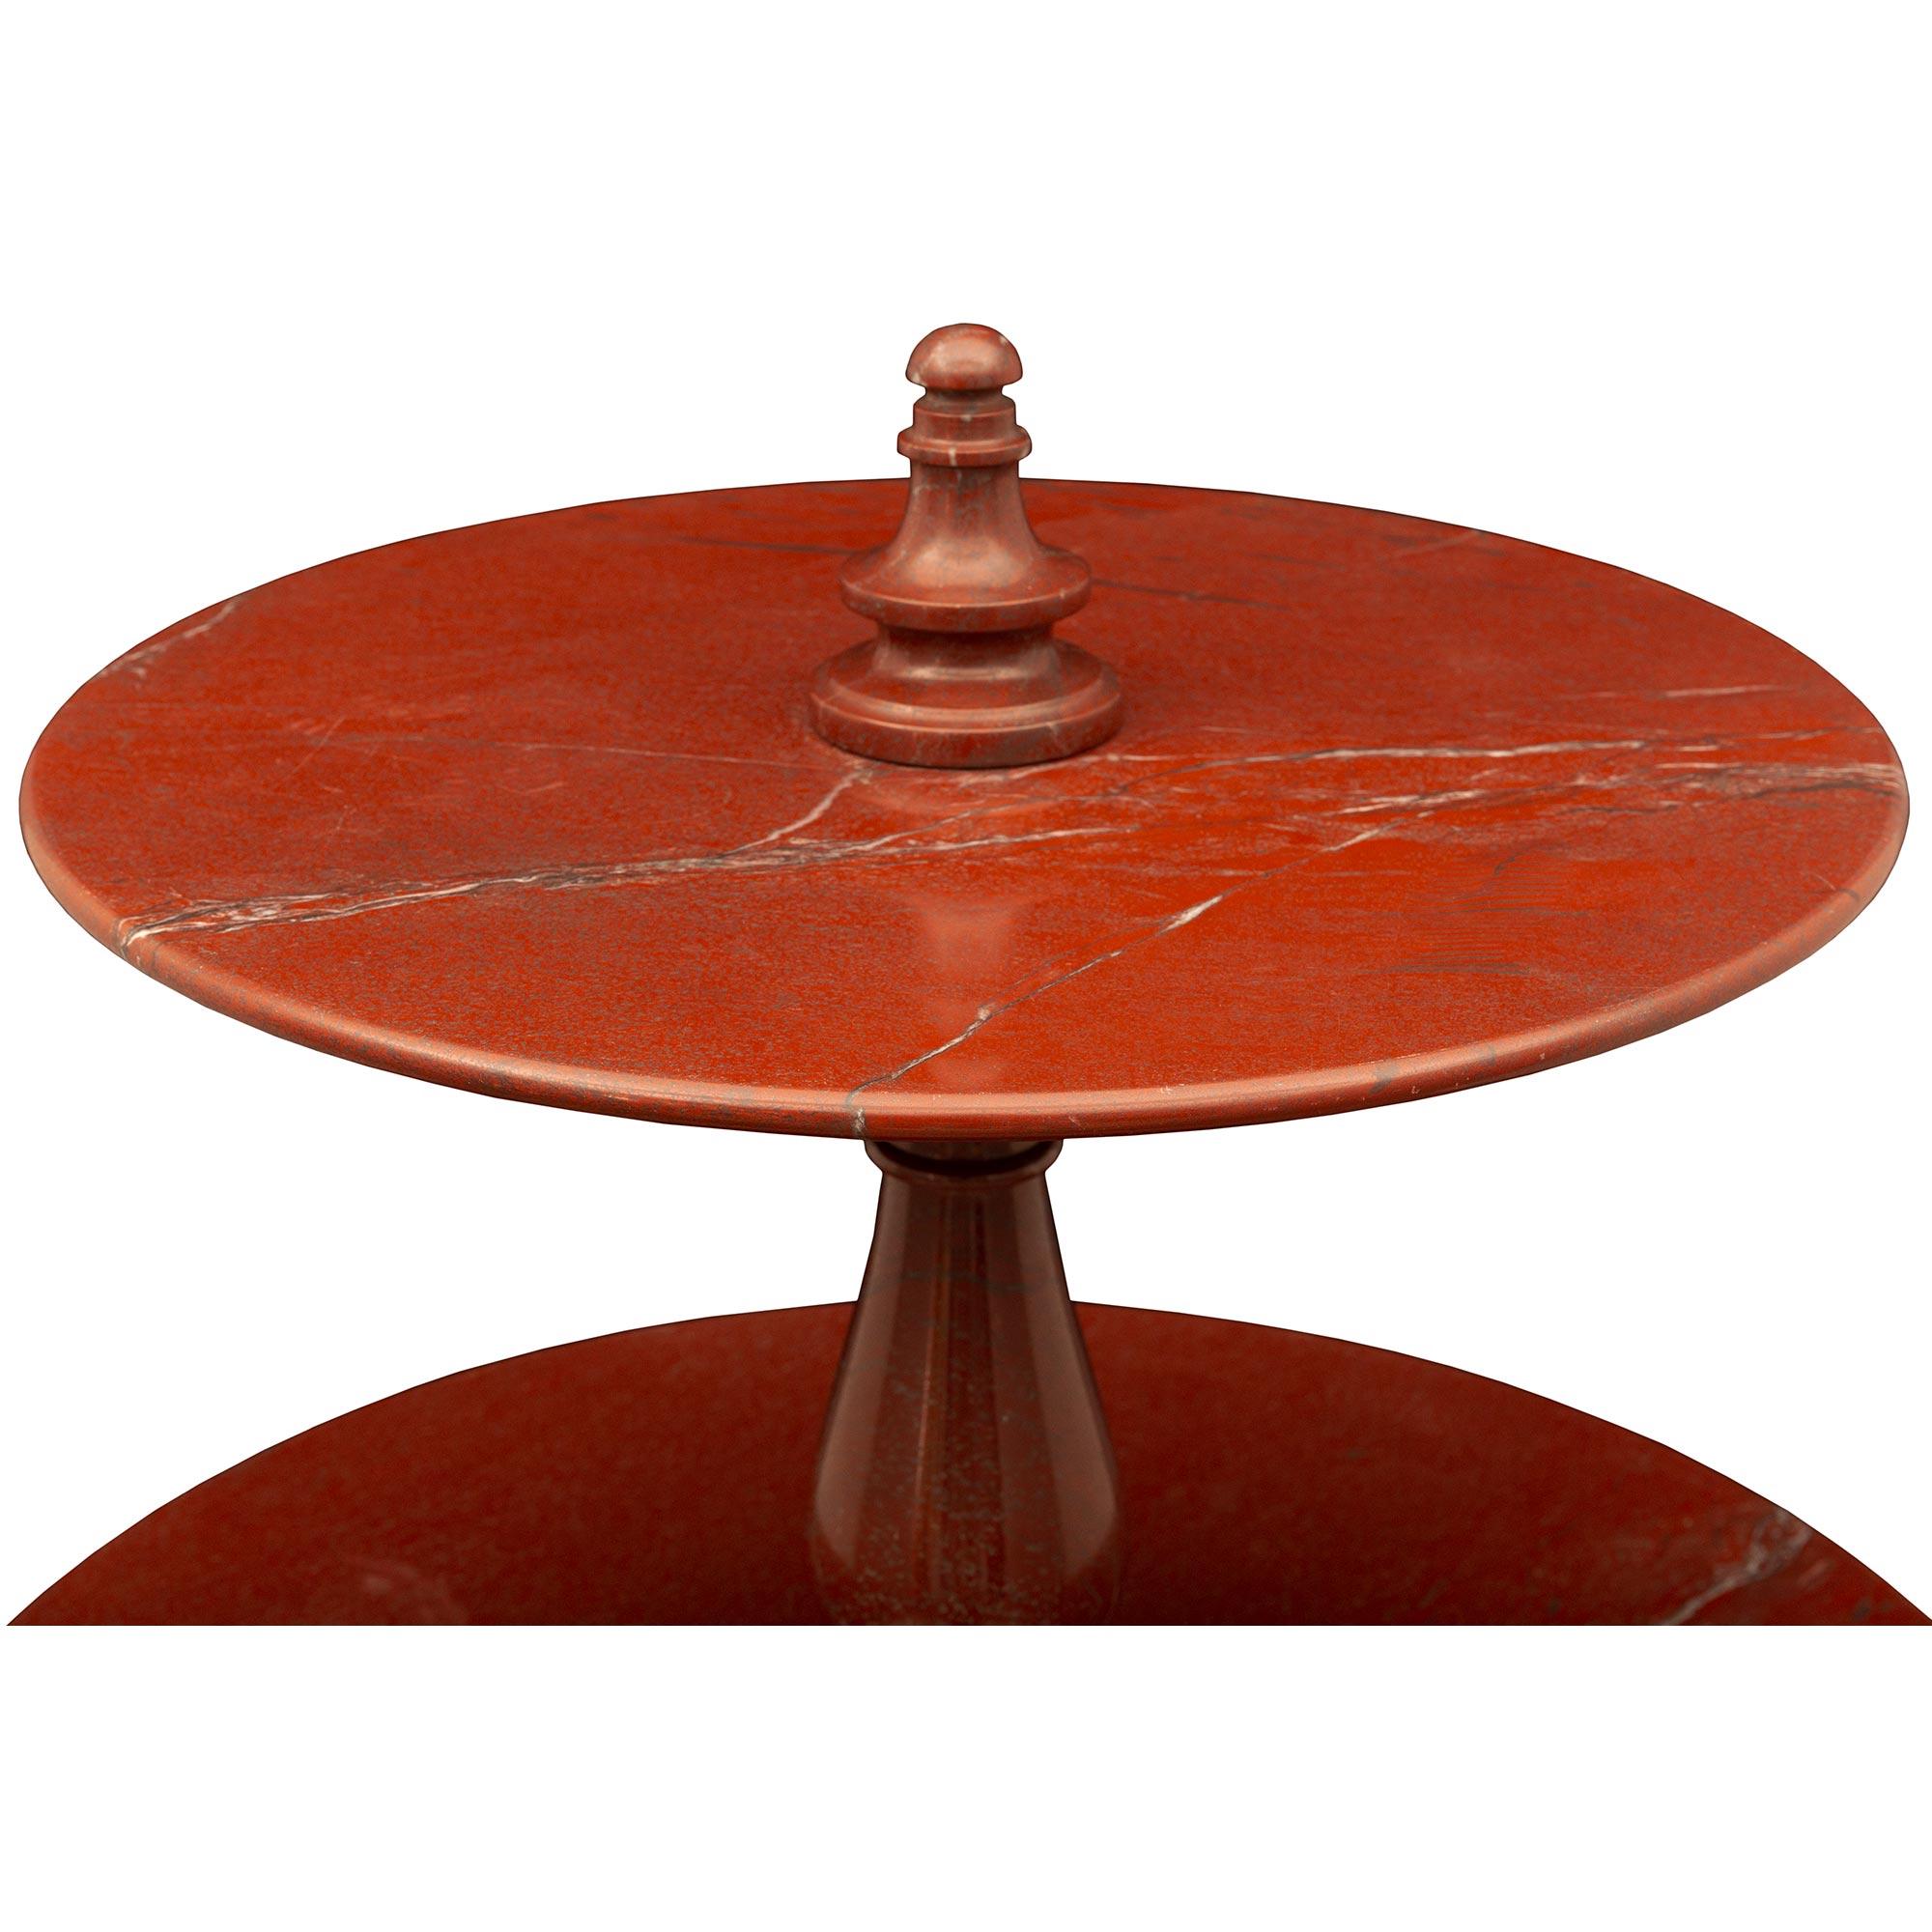 A stunning and rare pair of Italian turn-of-the- century rouge antique de Grece marble three-tier tables. Each striking table is raised by a circular mottled base with three bun feet. Leading up the baluster-shaped supports are three elegant tiers